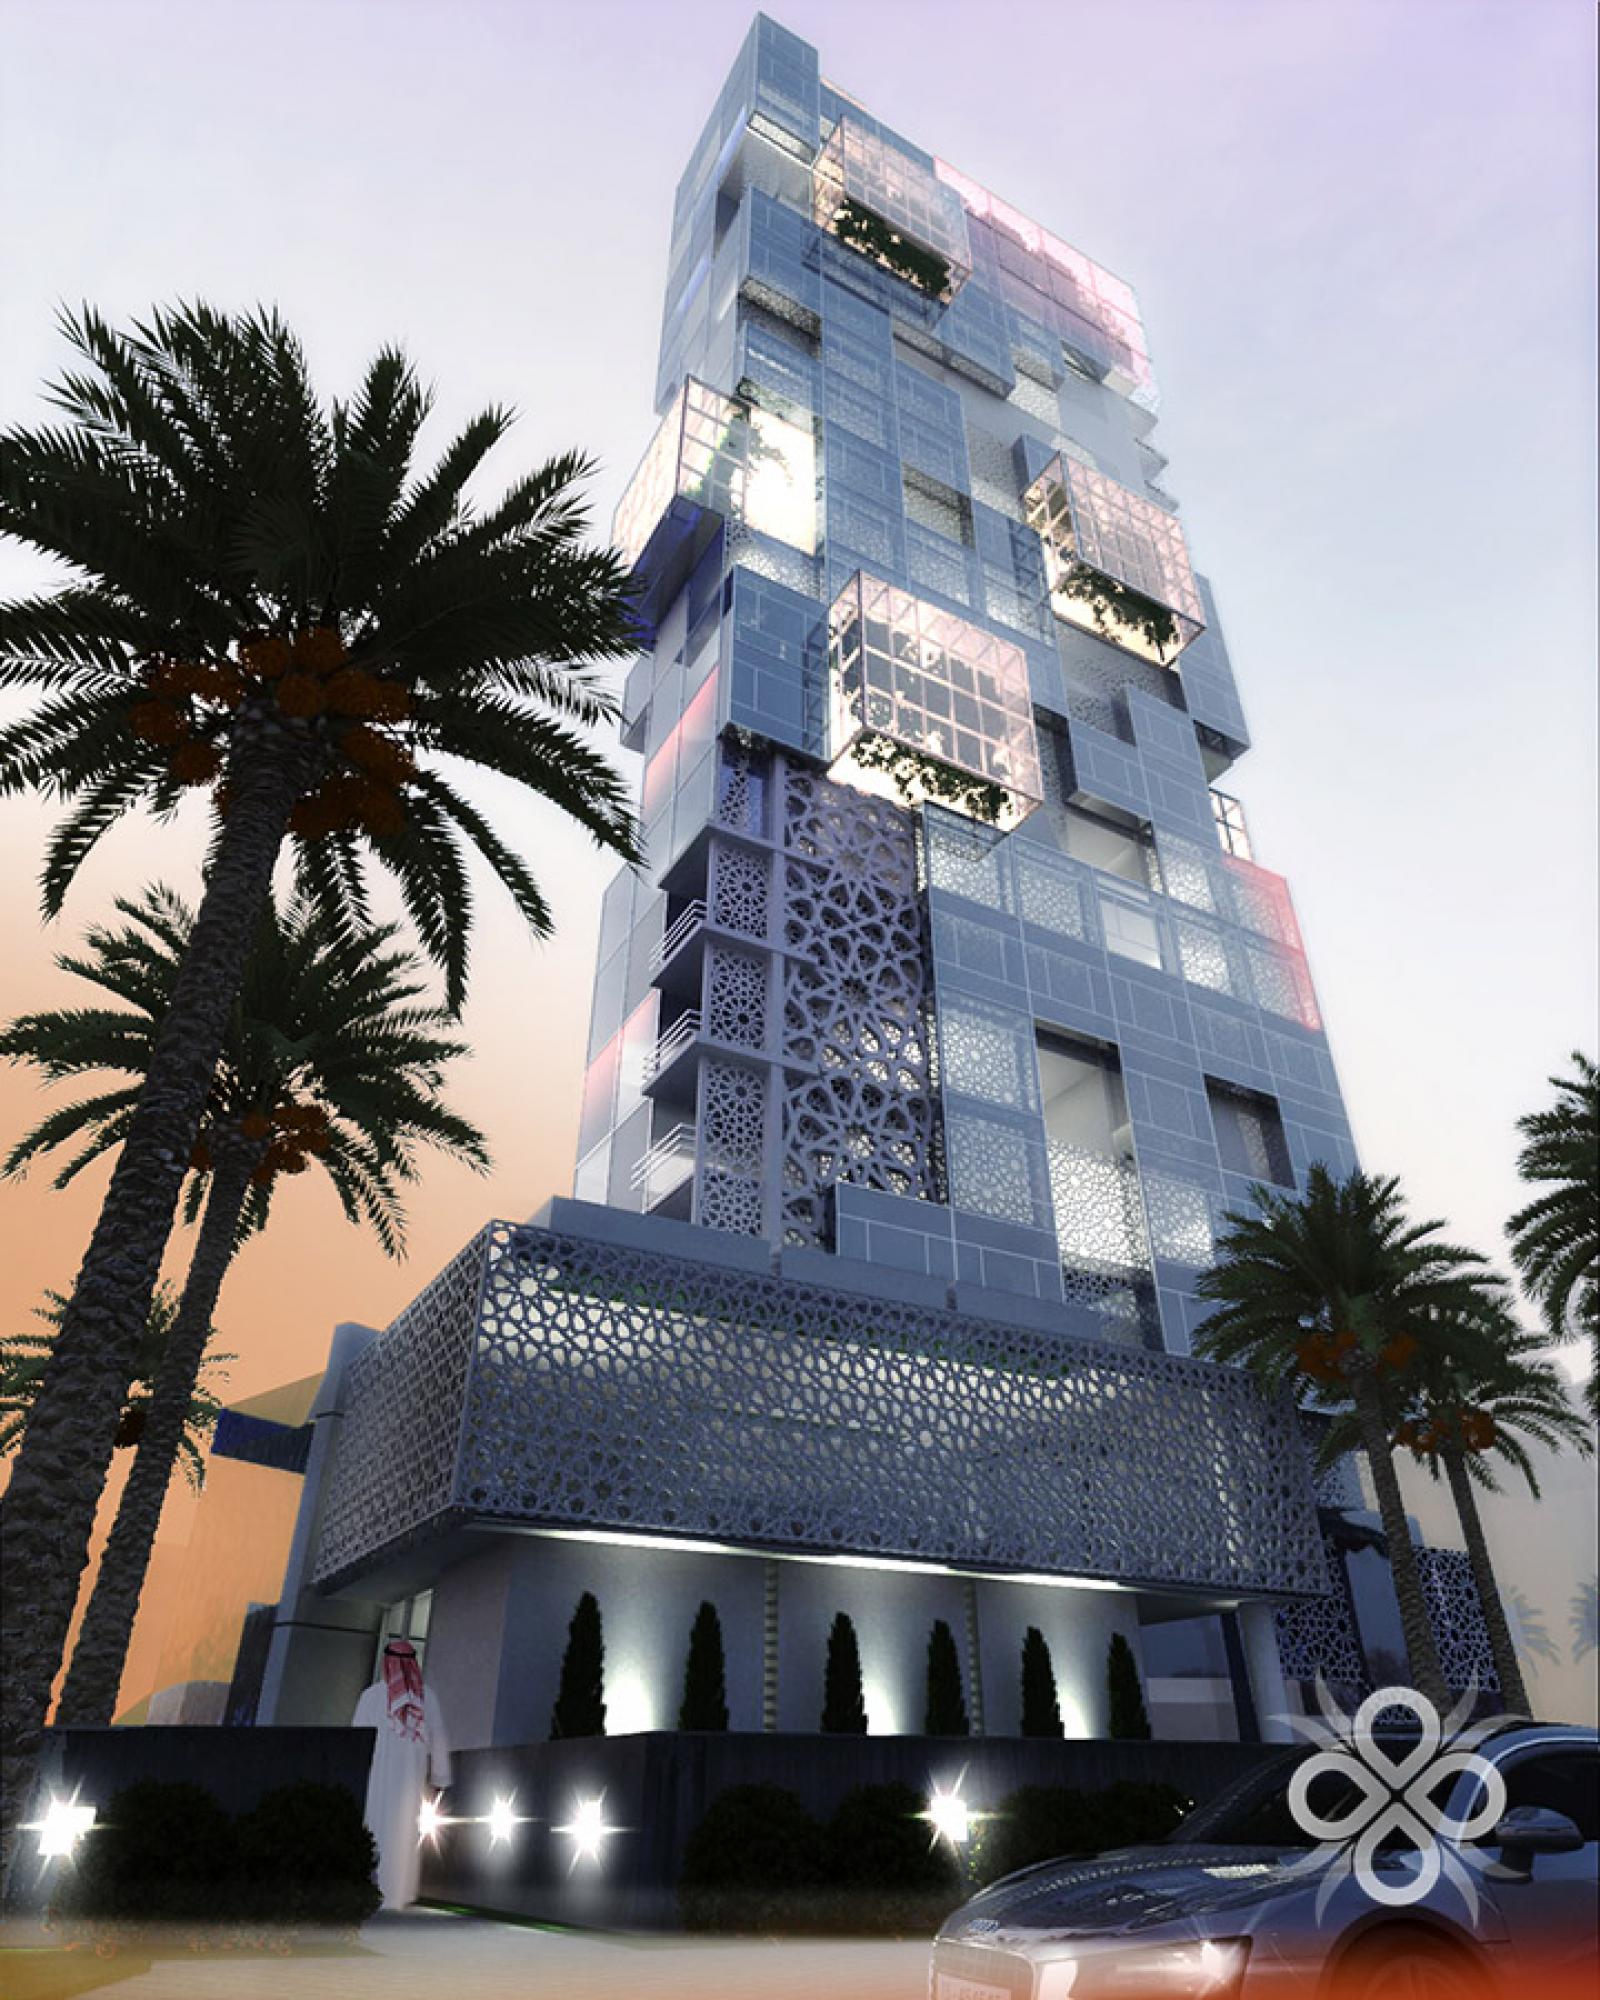 Residential Tower in Kuwait – “Vertical Courtyard Living”